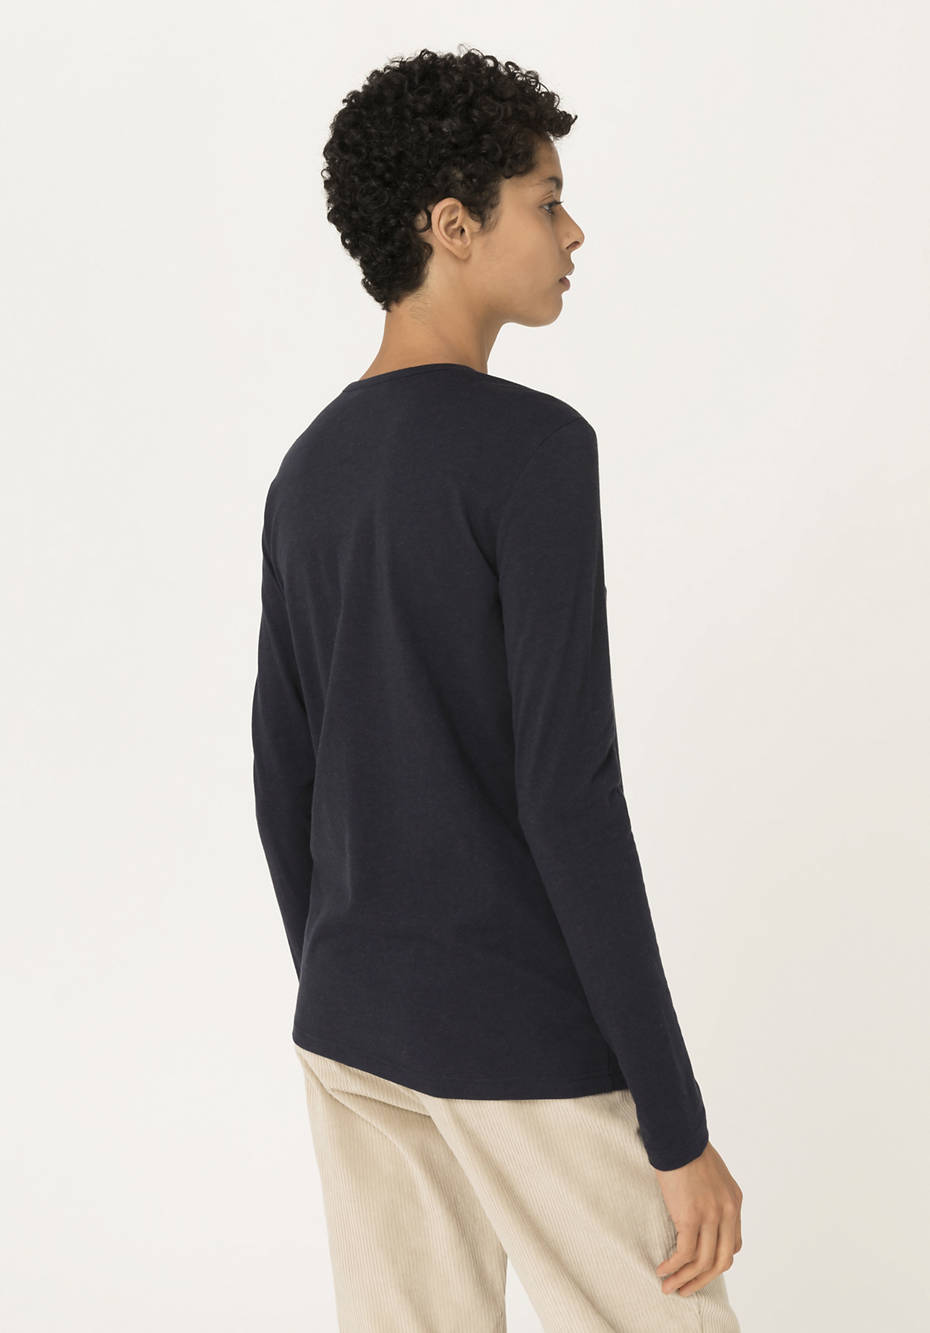 Shirt made from organic cotton with organic new wool